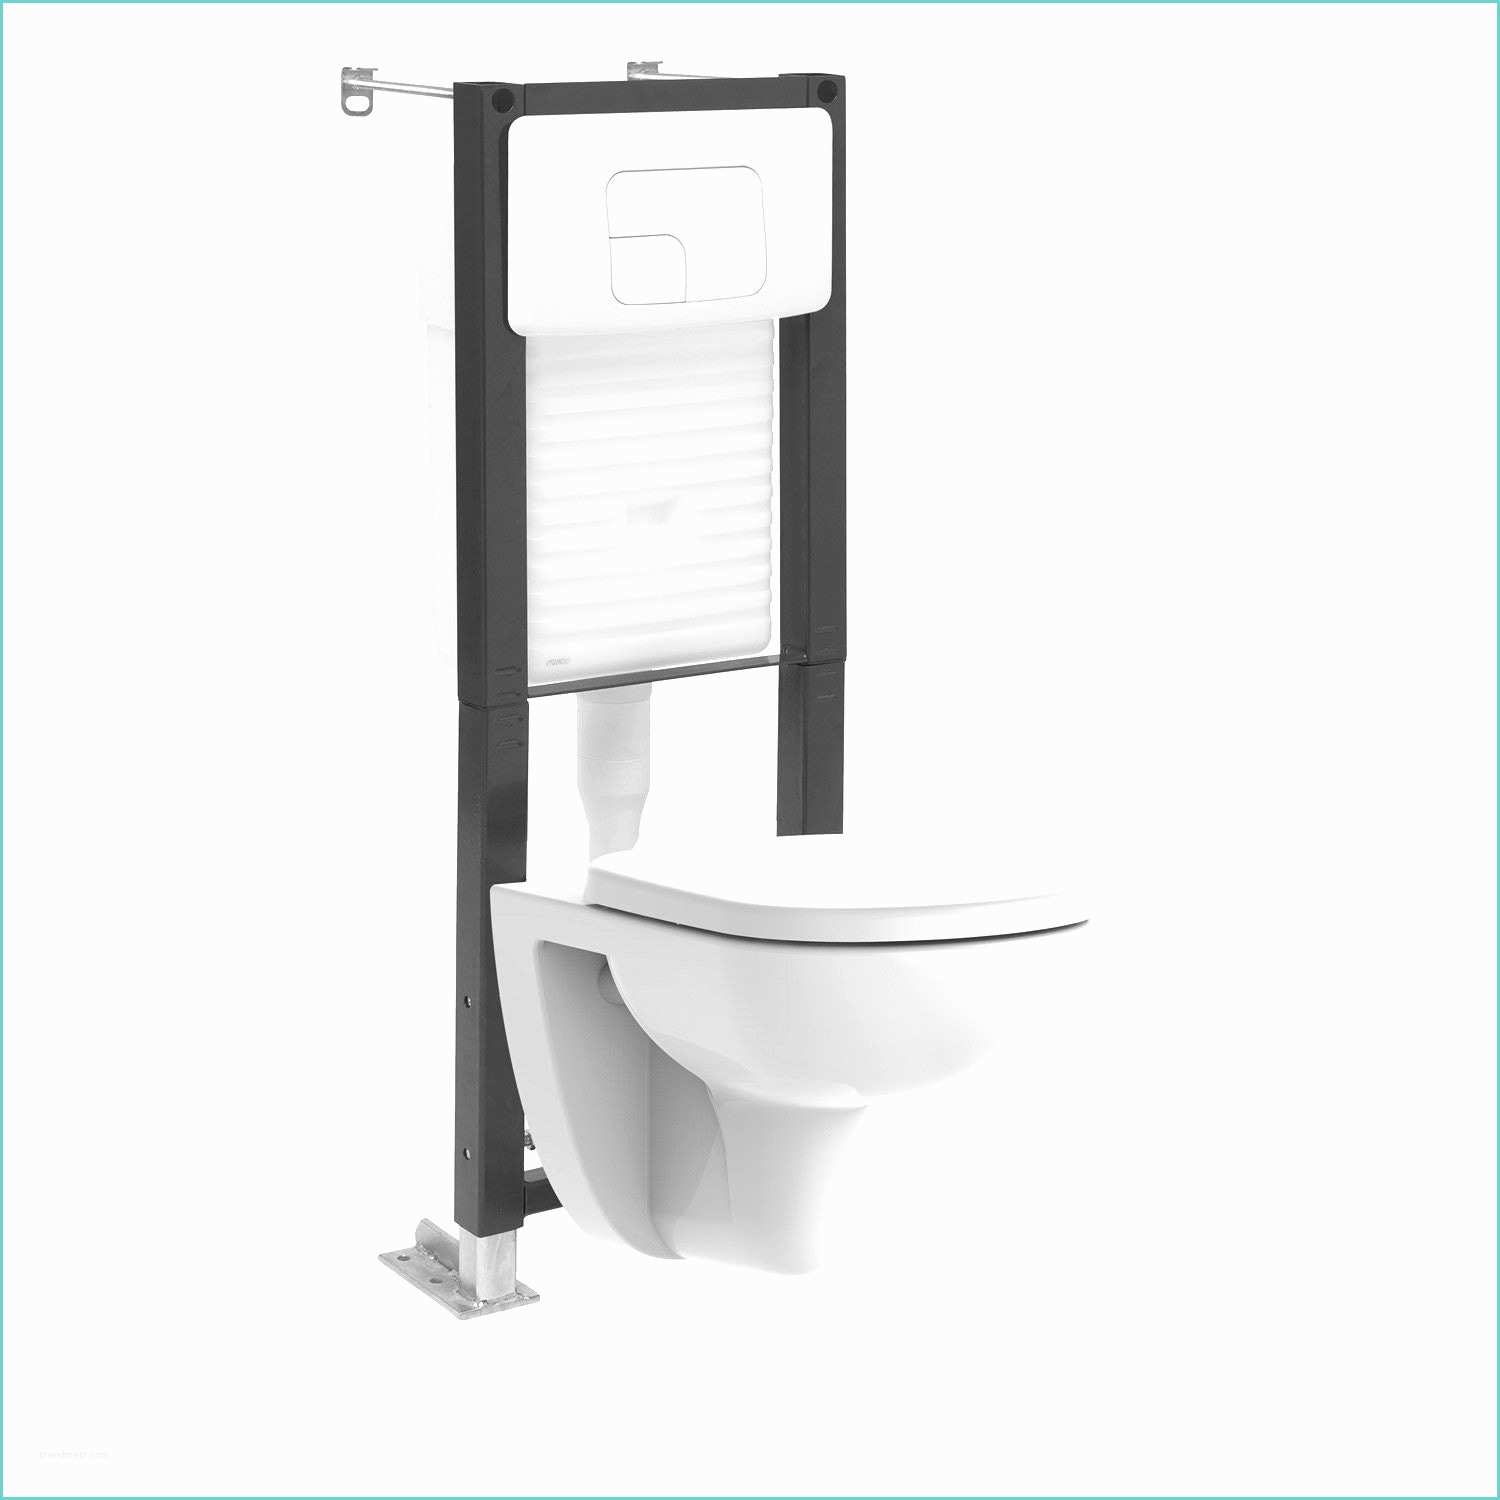 Lave Main Credence Leroy Merlin Lavabo toilette Great Wc Lavabo Intgr Petit Lave Mains